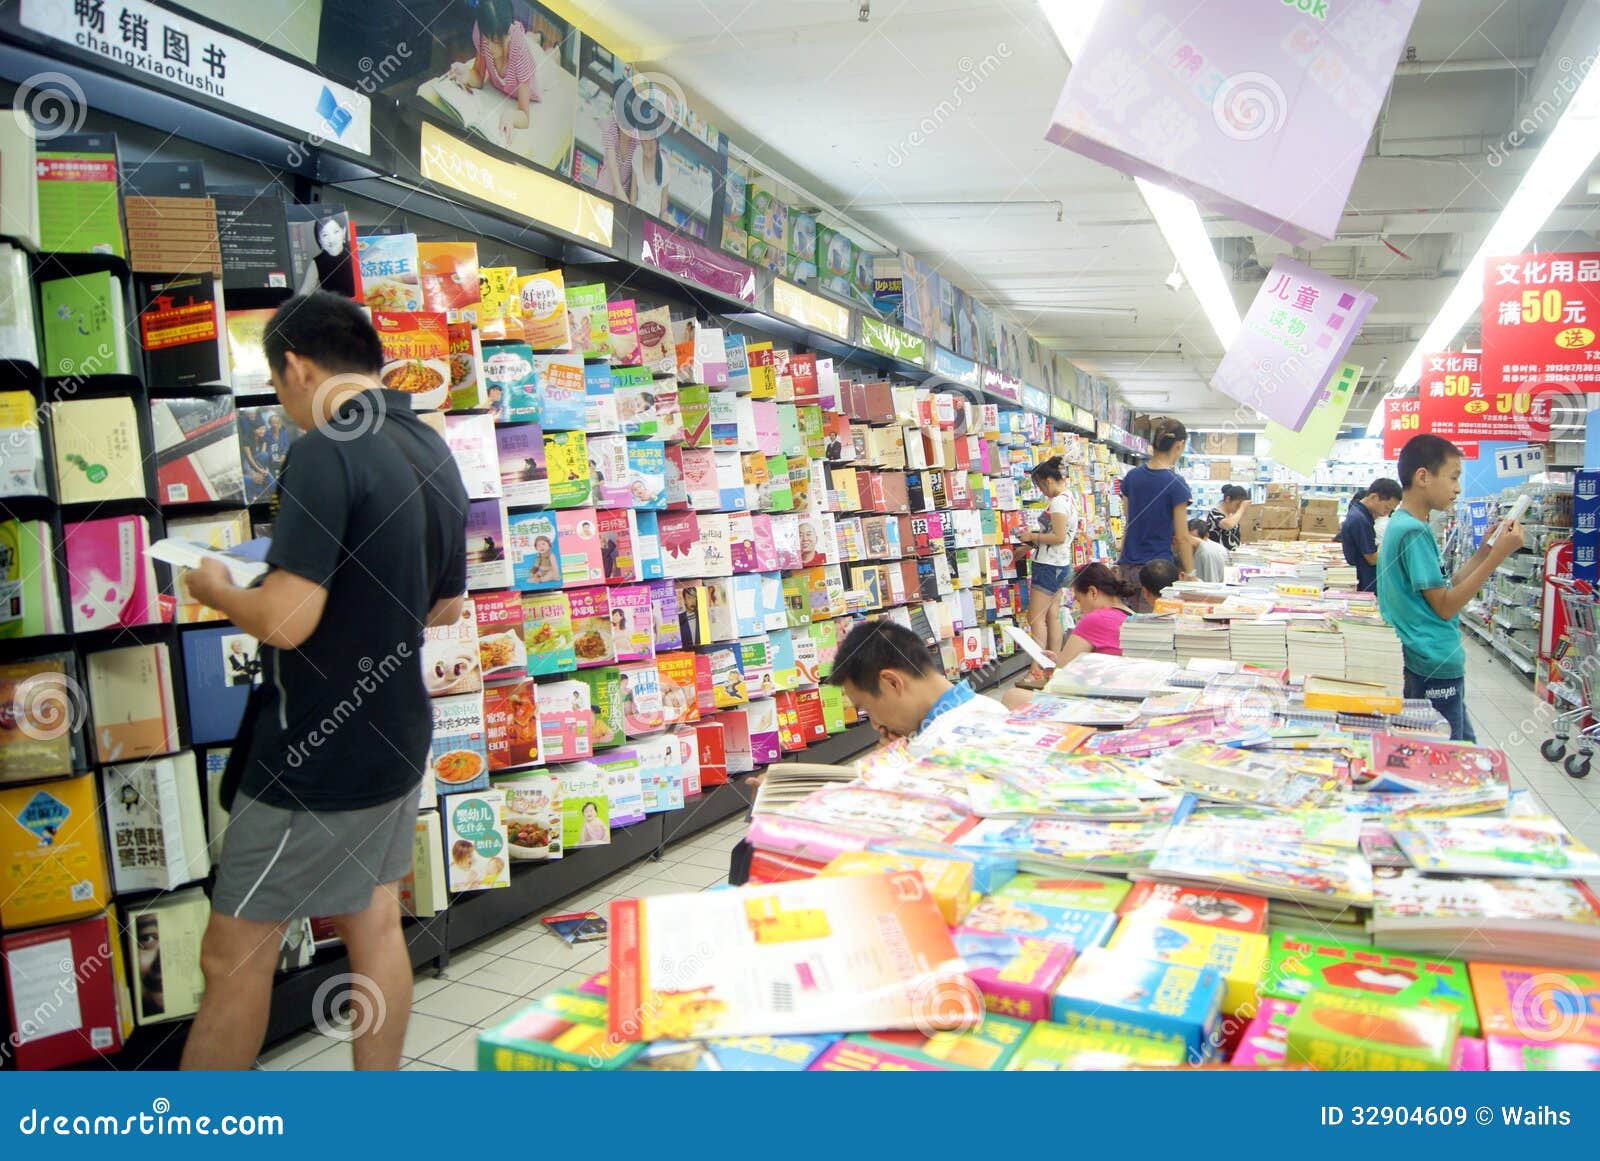 Changsha China Bookstore And Readers Editorial Stock